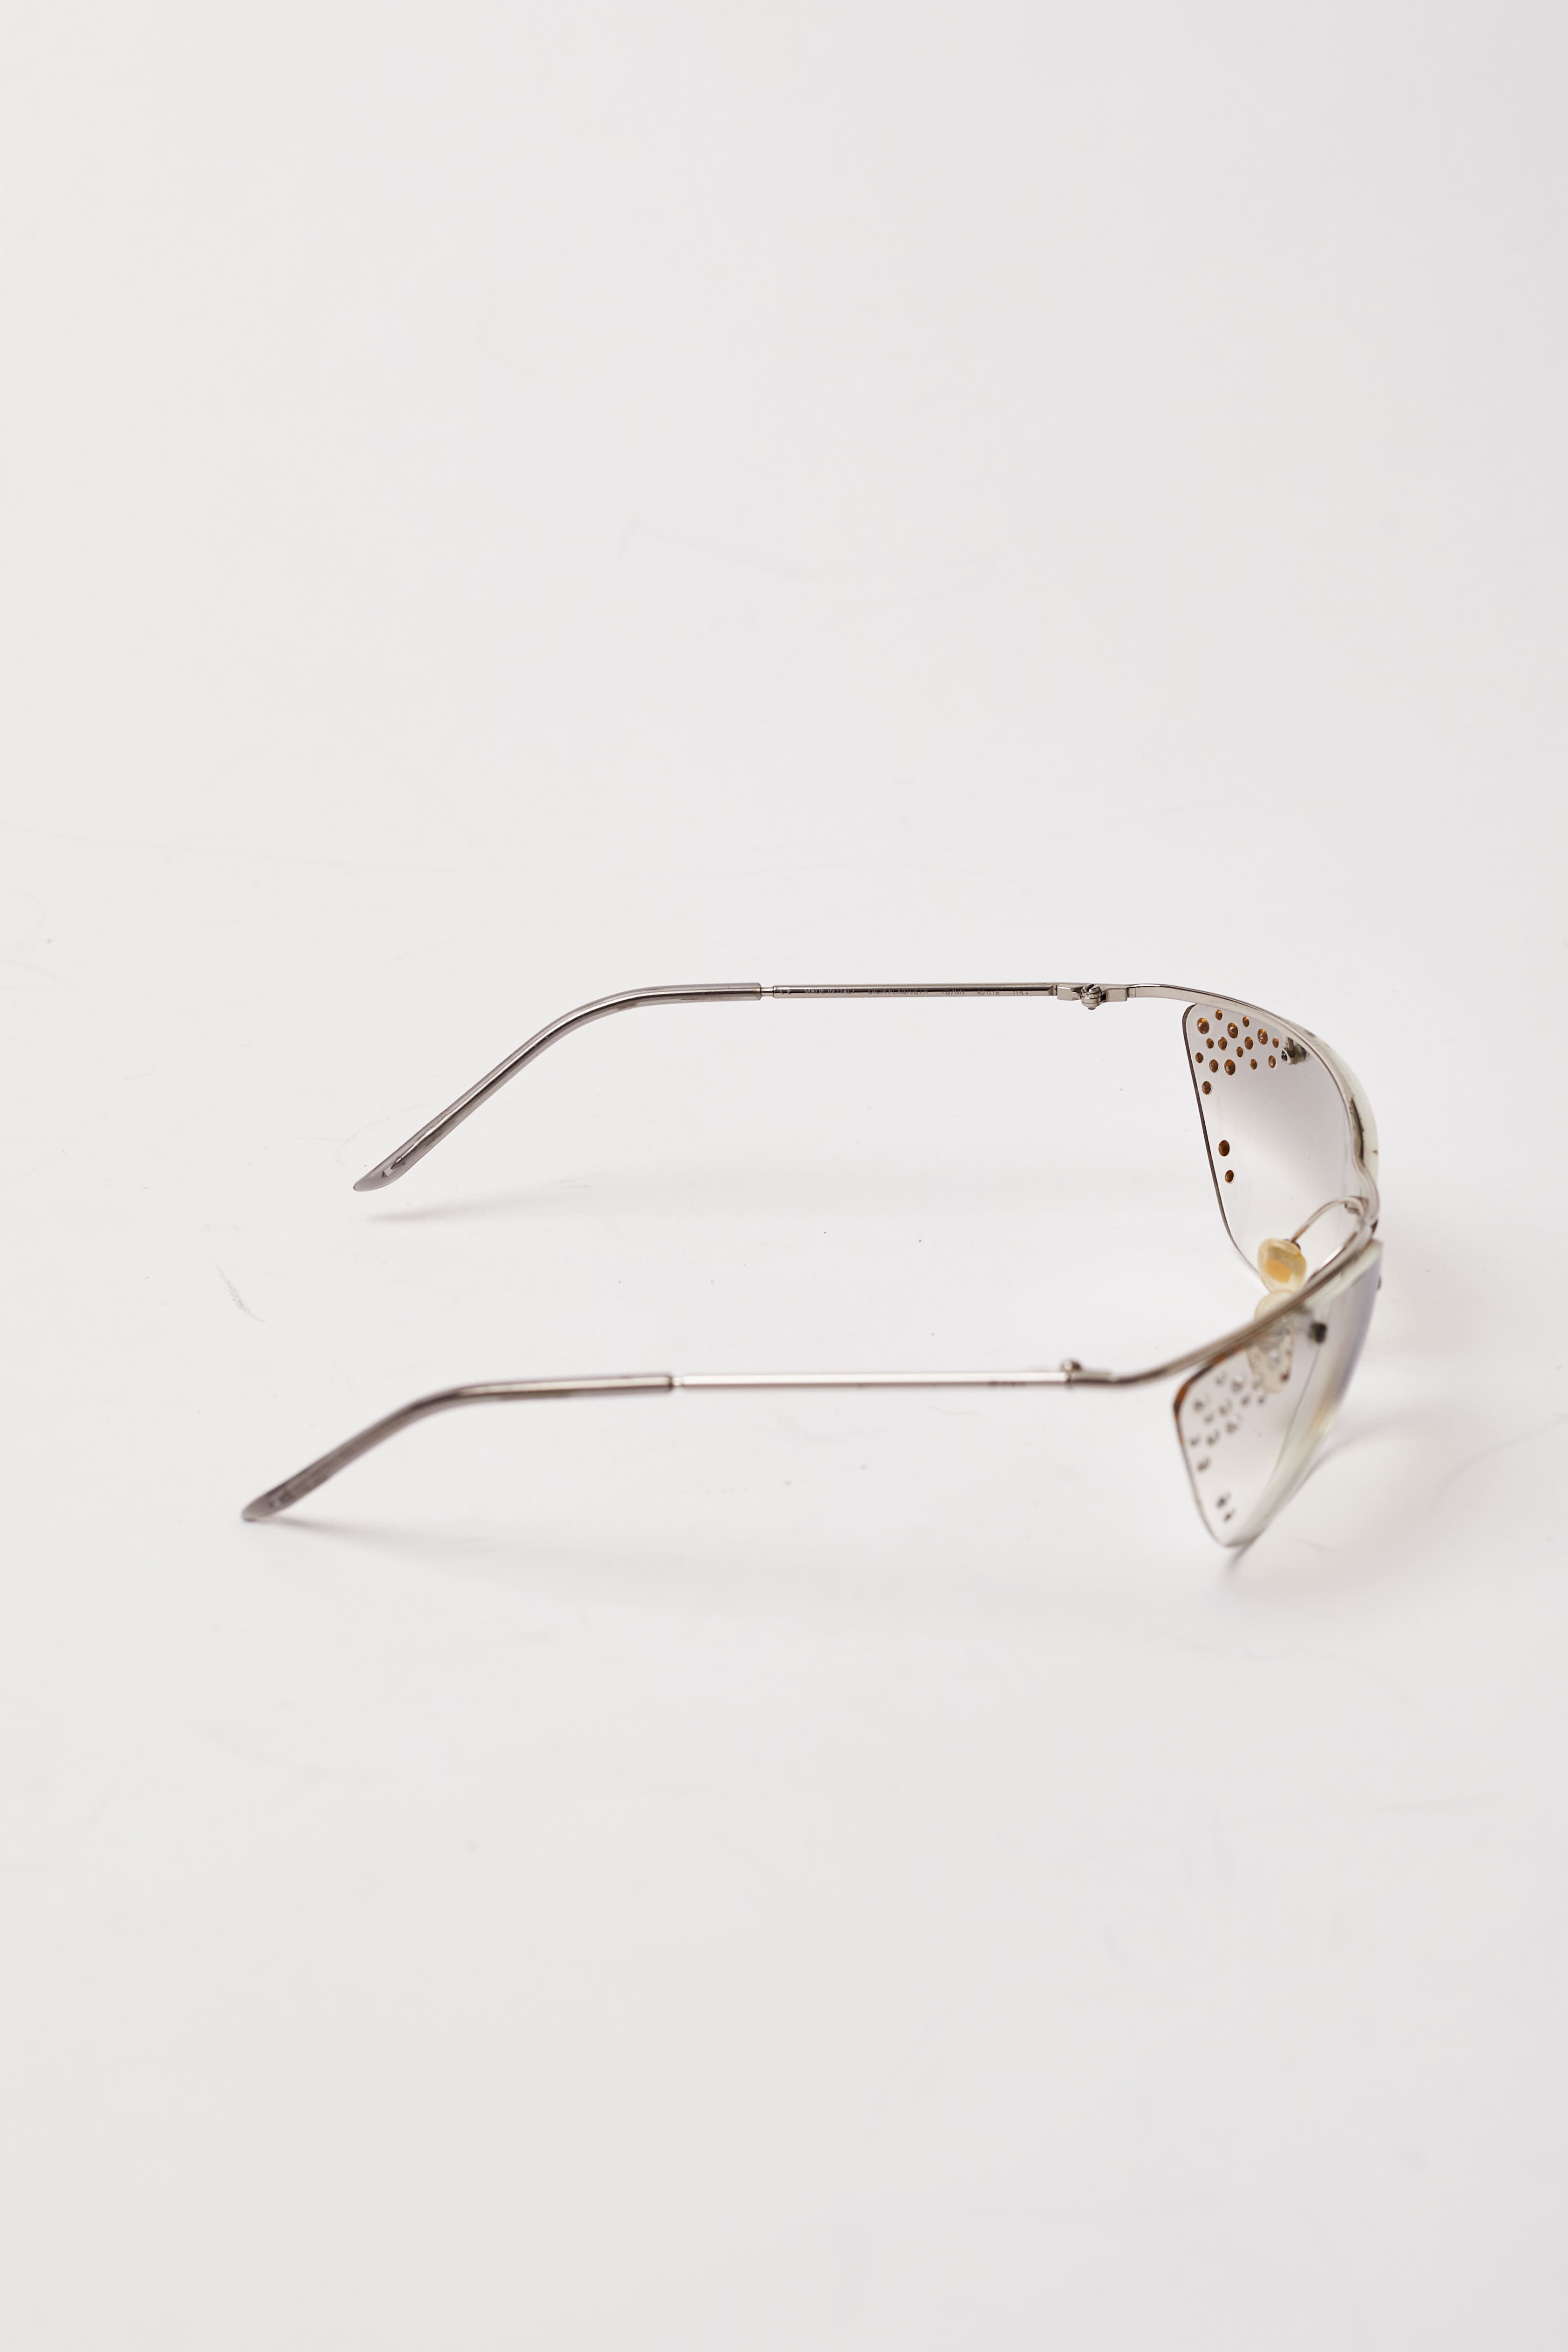 Christian Dior <br> Y2K John Galliano Flash rimless sunglasses with crystals